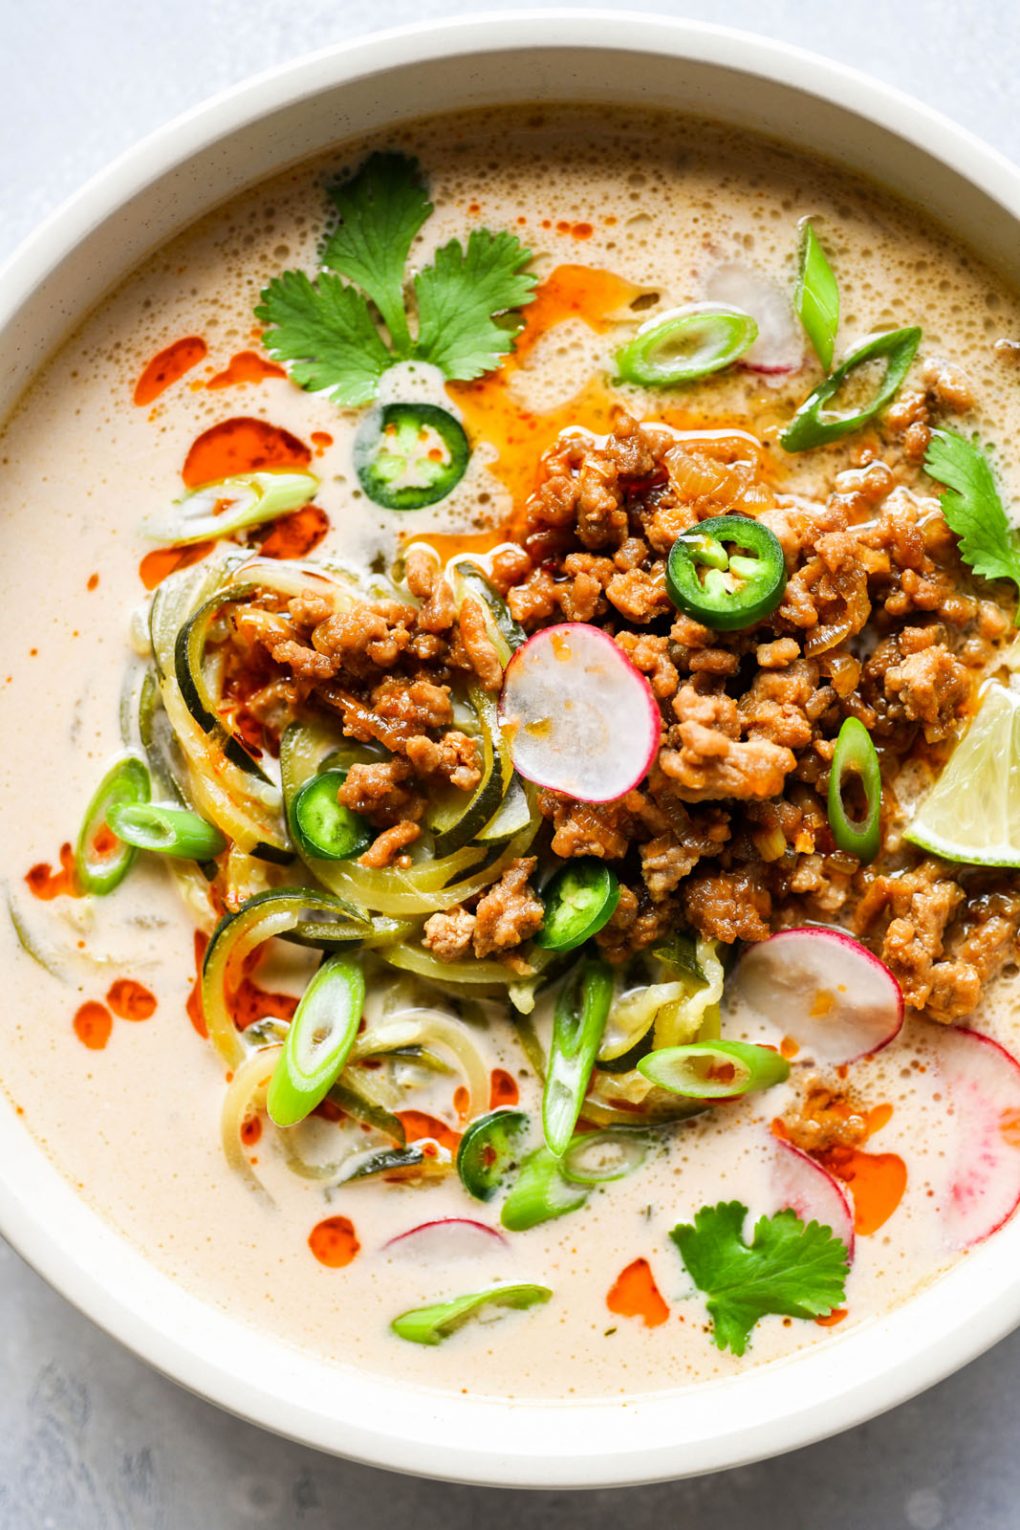 Overhead shot of a bowl of zucchini noodle soup with crispy pork and a coconut broth. Topped with thinly sliced radishes, green onions, jalapeno, cilantro, and chili oil. In a light colored bowl on a white background.